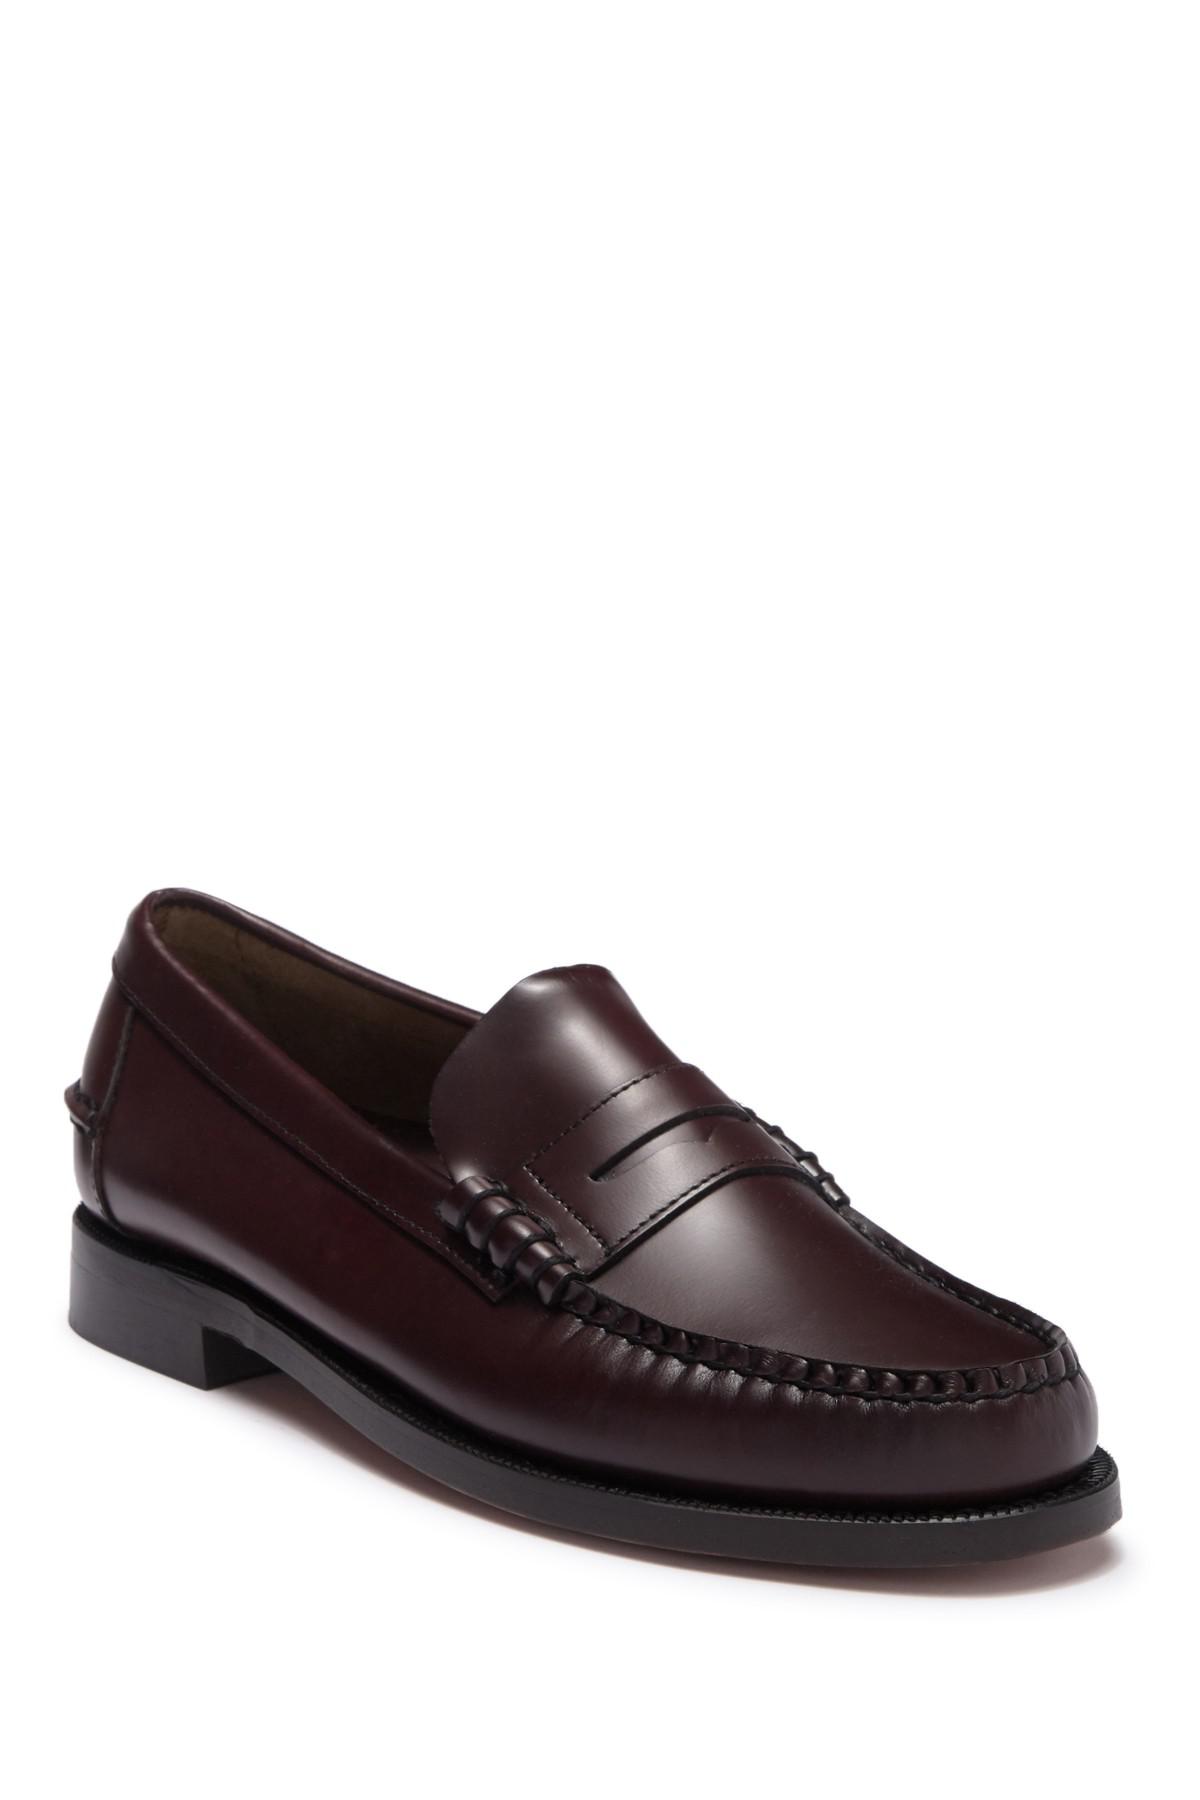 Lyst - Sebago Classic Penny Loafer in Brown for Men